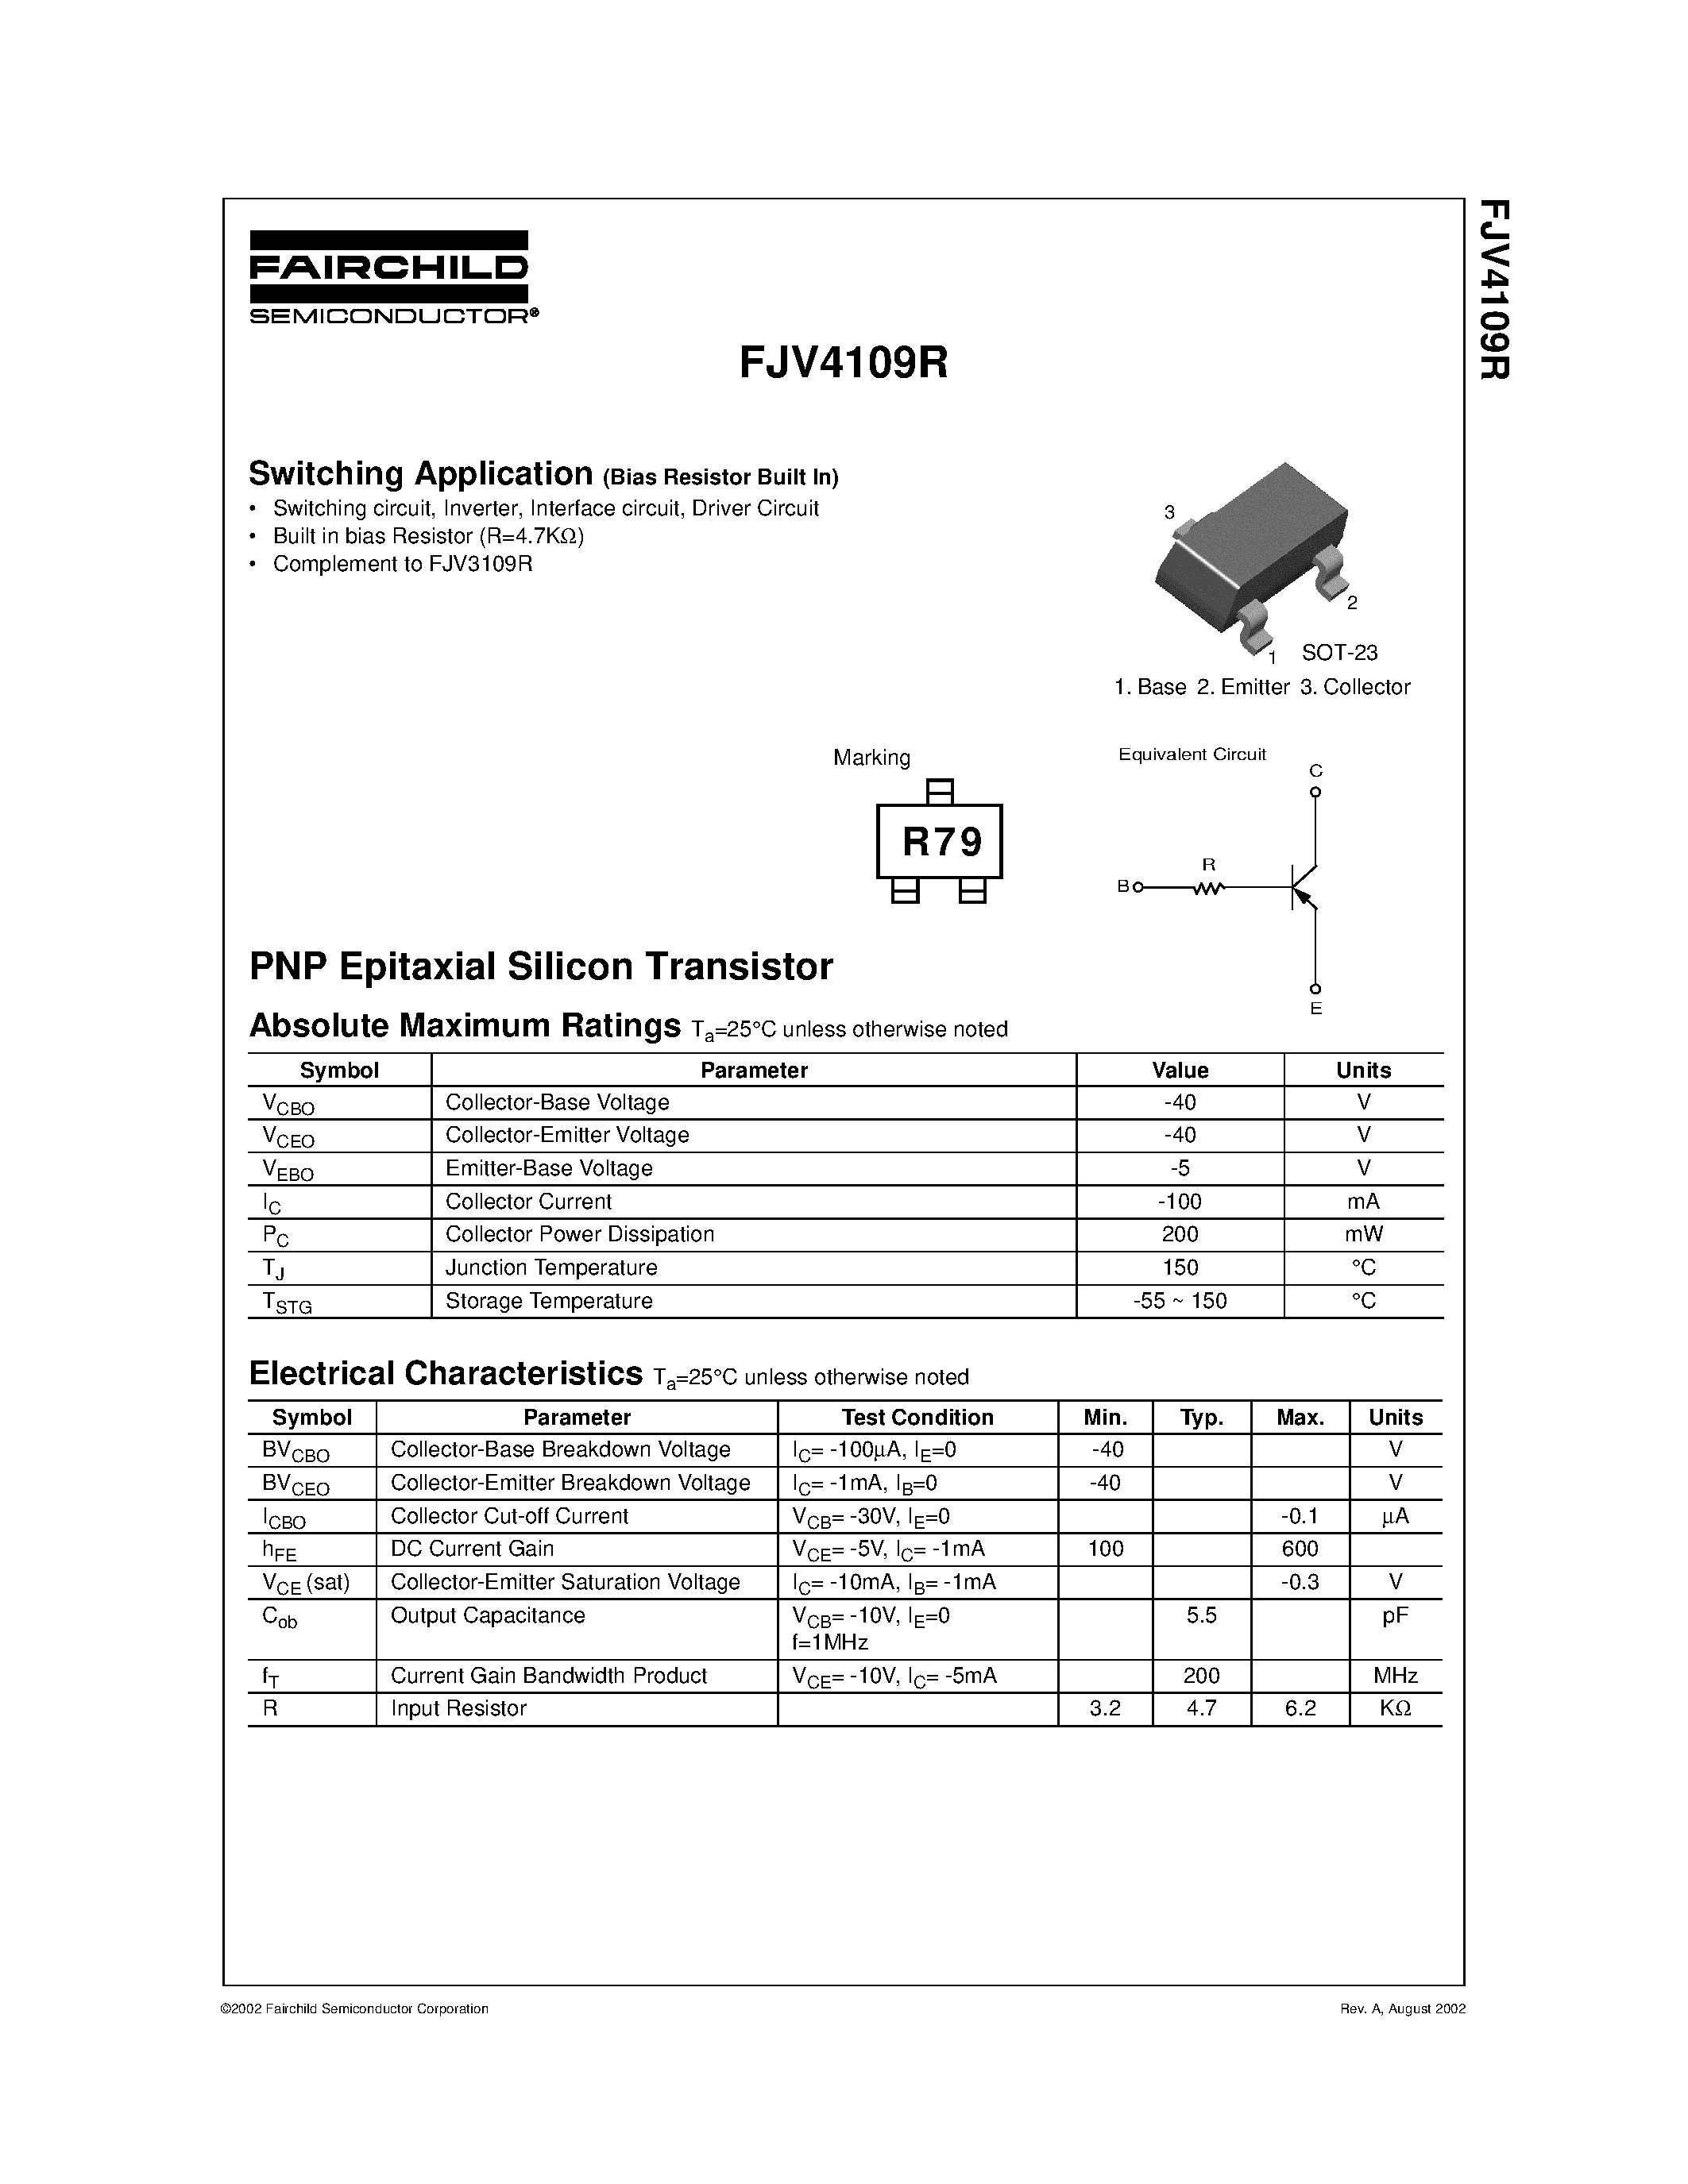 Datasheet FJV4109R - PNP Epitaxial Silicon Transistor page 1